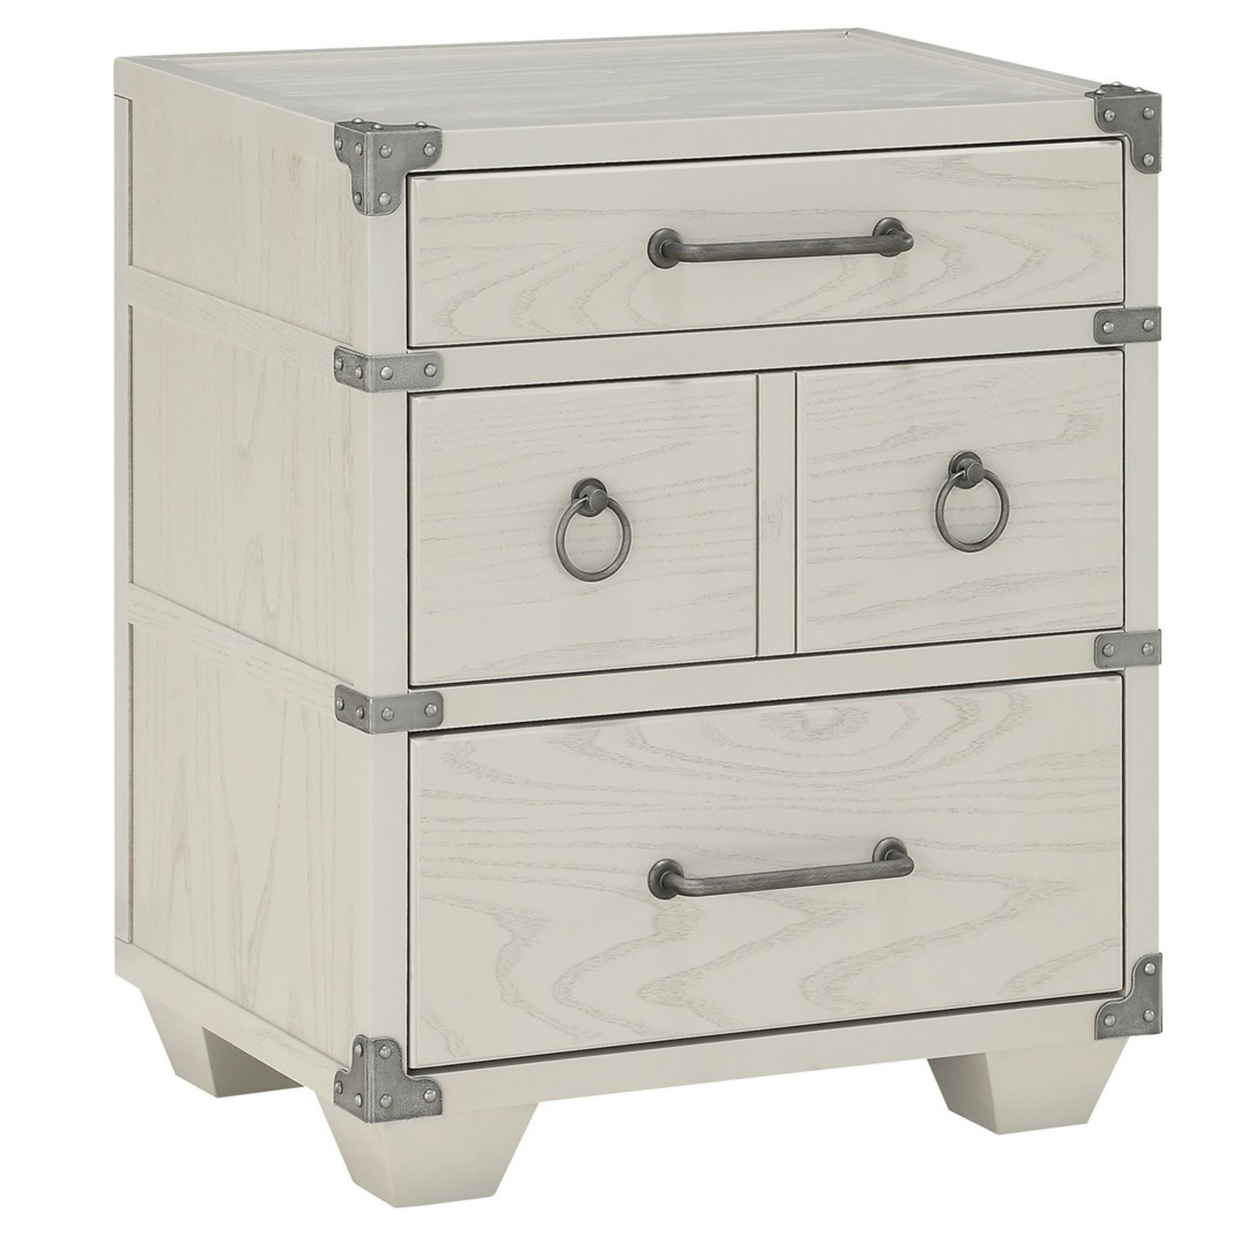 Four Drawer Wooden Nightstand With Metal Ring Pulls And Handles, Gray- Saltoro Sherpi